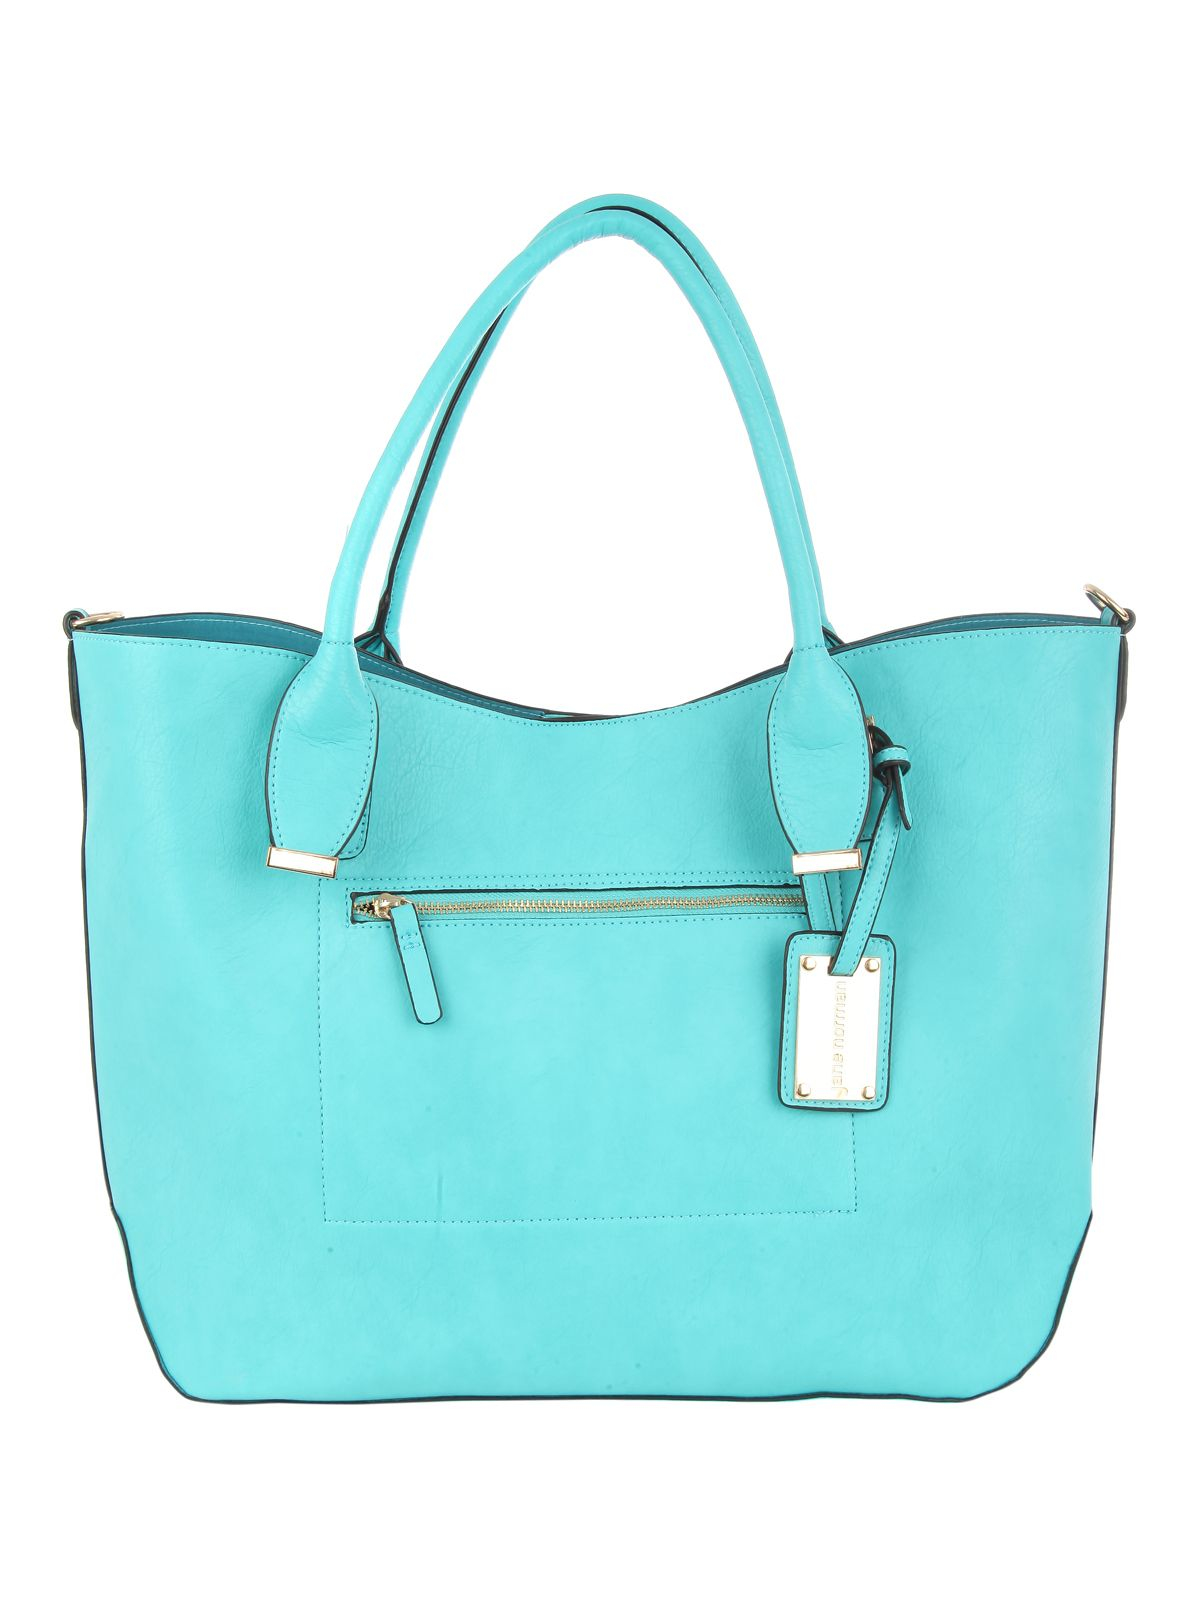 Jane norman Tropical Turquoise Bag in Blue | Lyst